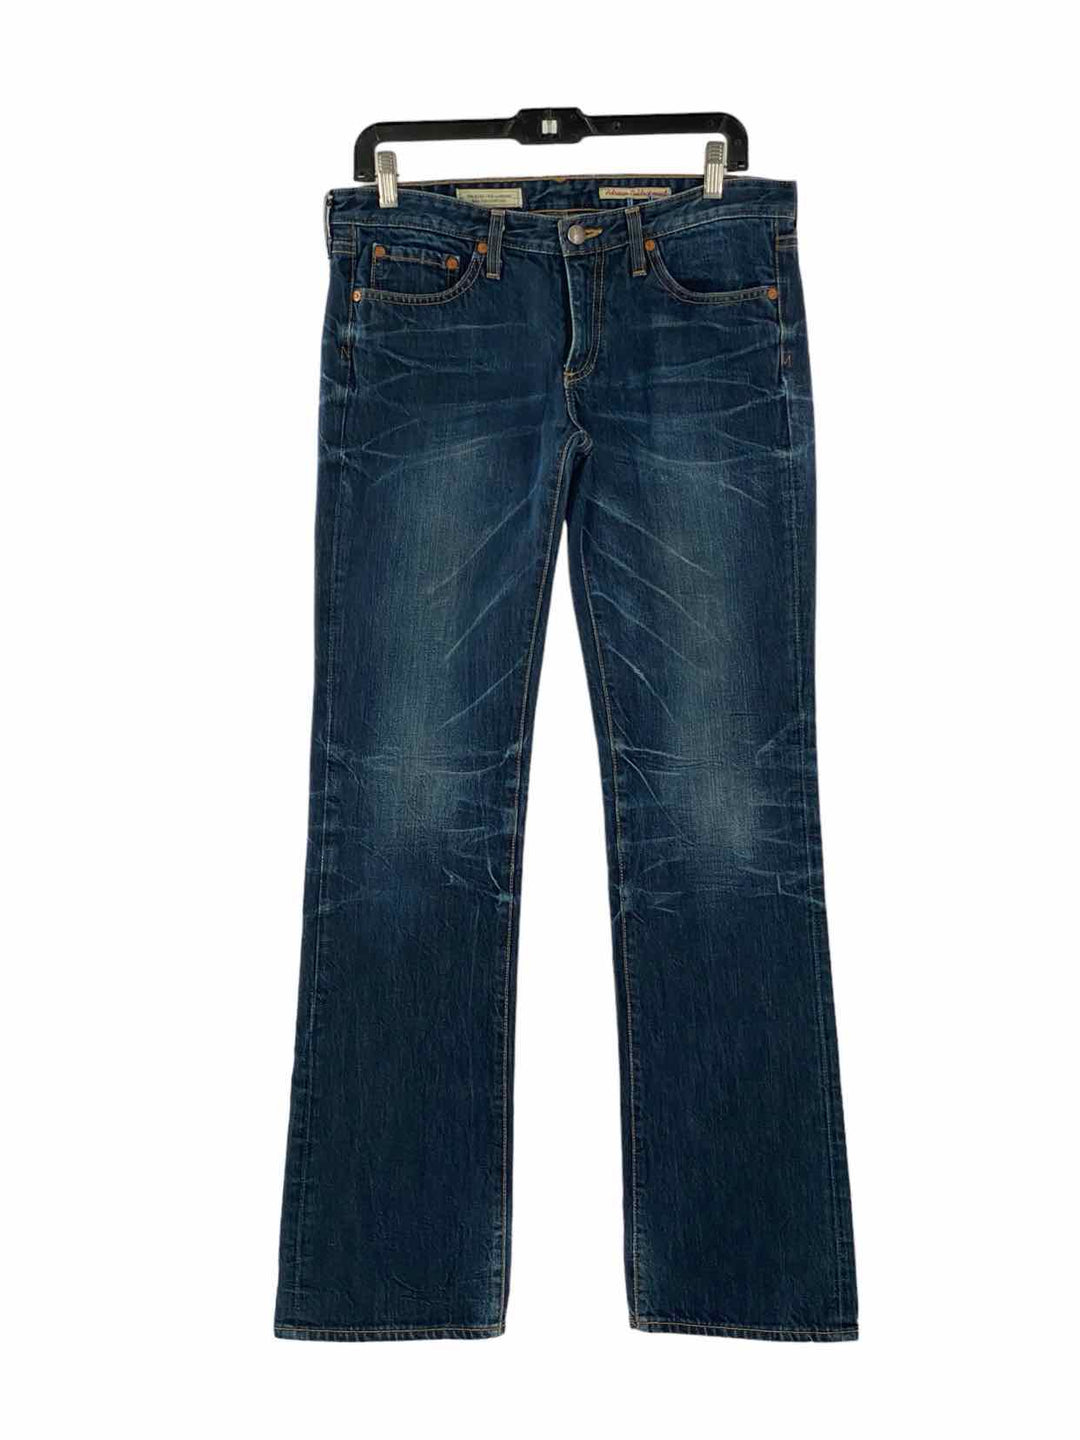 Adriano Goldschmeid Size 29 Blue Jeans